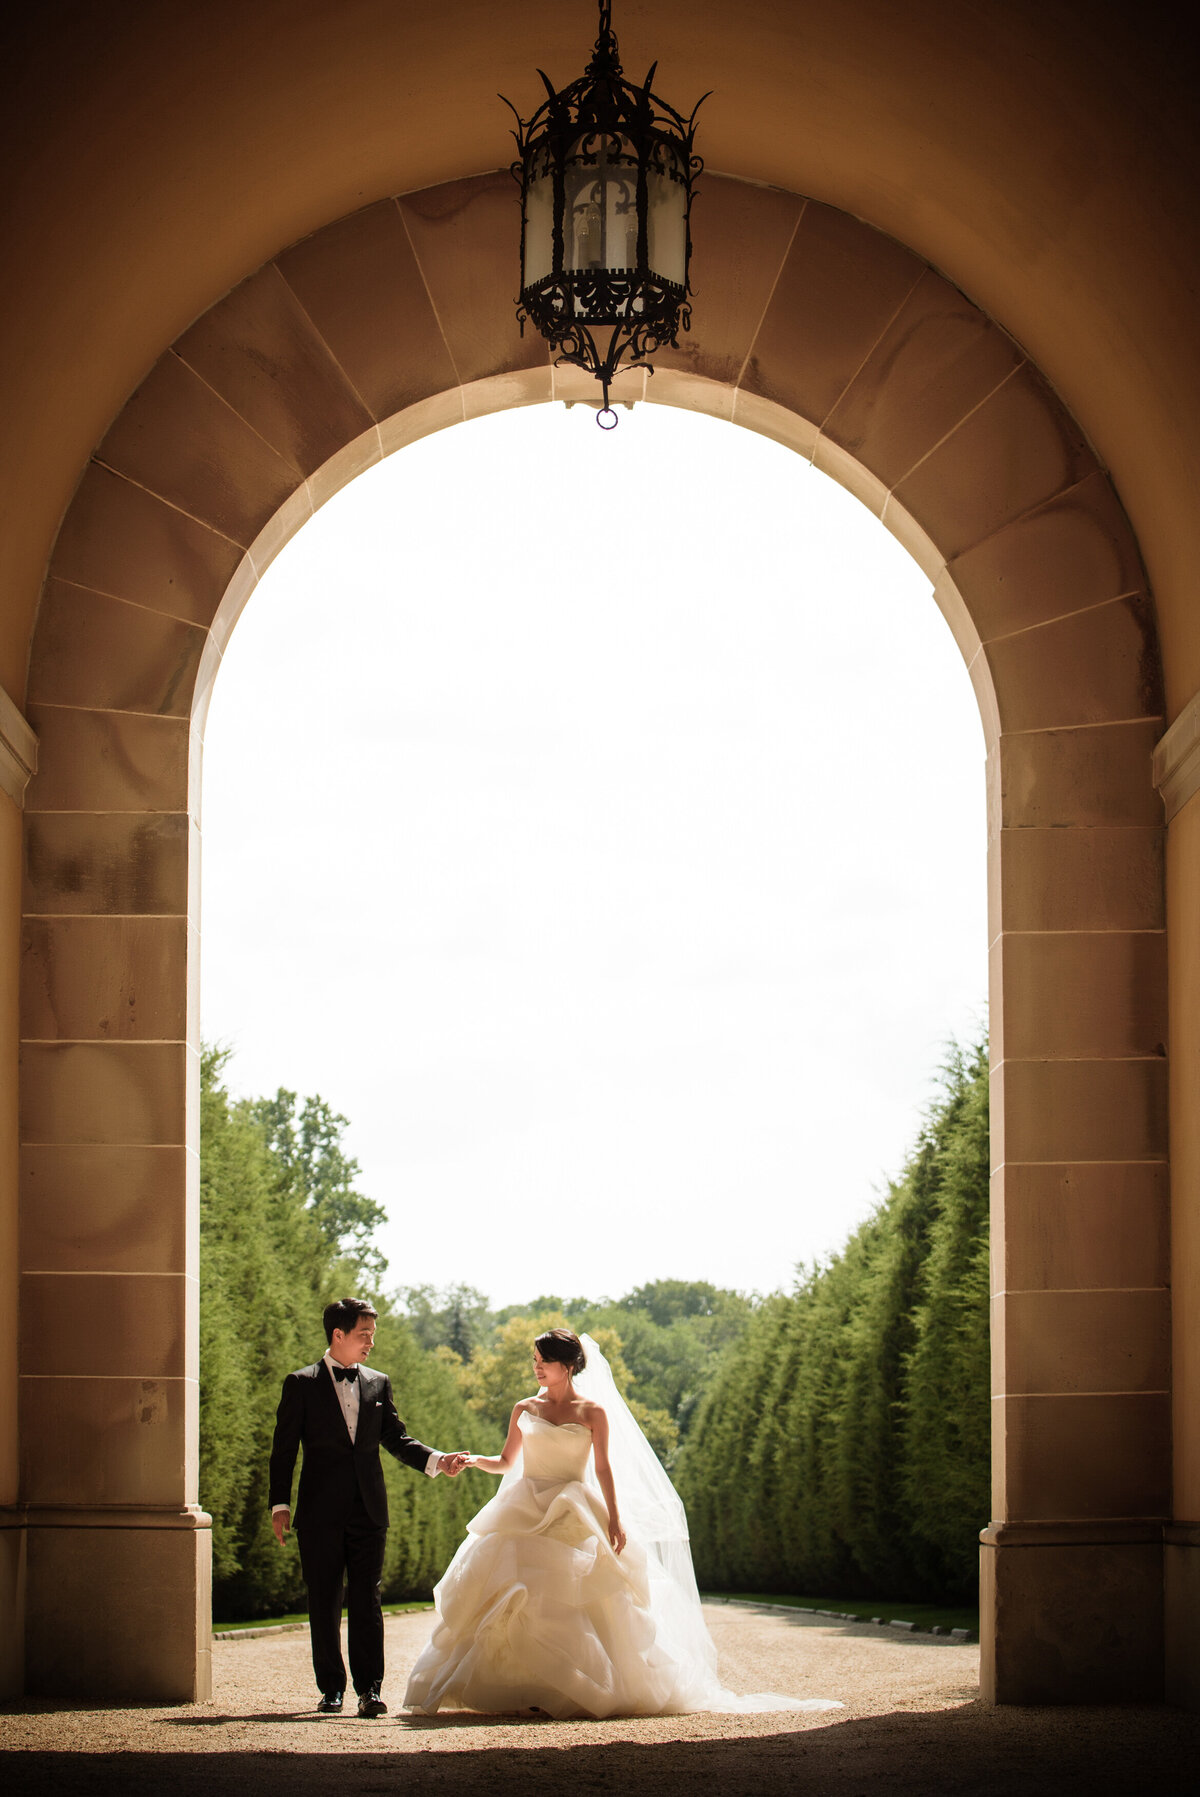 A bride and groom walking along a gravel path while holding hands.